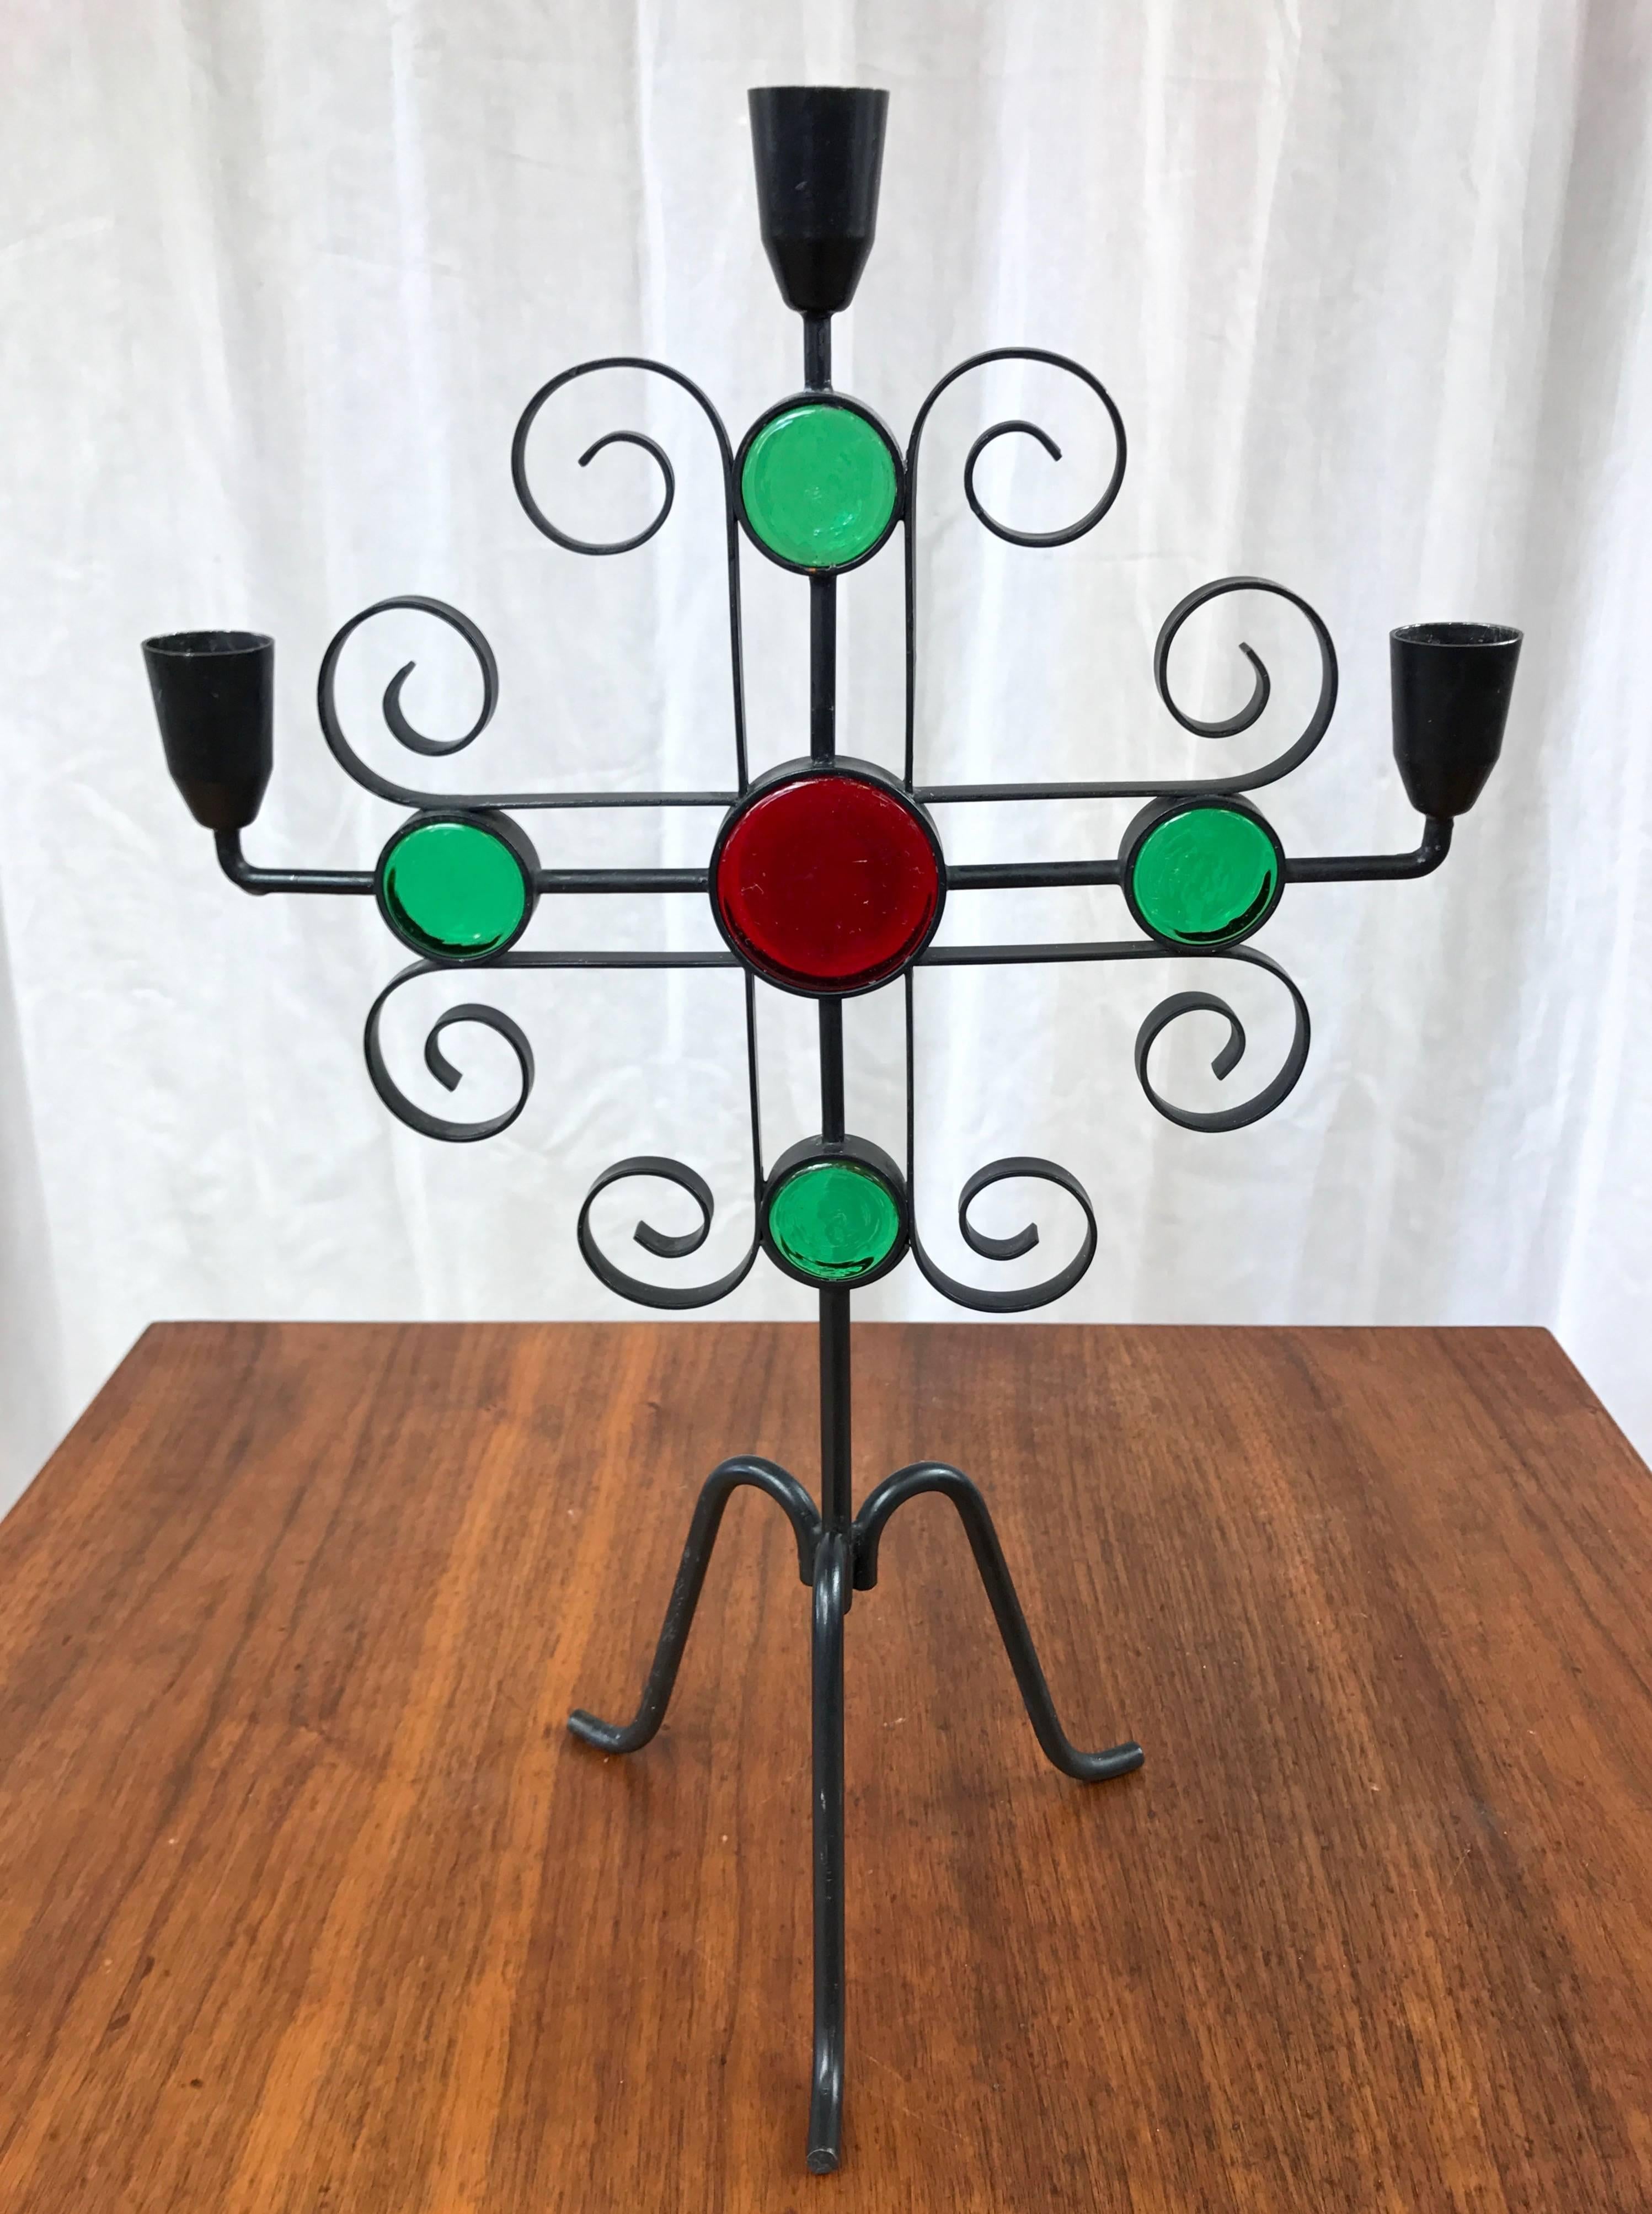 A tall wrought iron candelabra-style candleholder with glass accents by Gunnar Ander for Ystad-Metall.

Its curlicues and vibrant colors represent a delightful Mid-Century Modern interpretation of traditional Swedish design motifs. Finished in